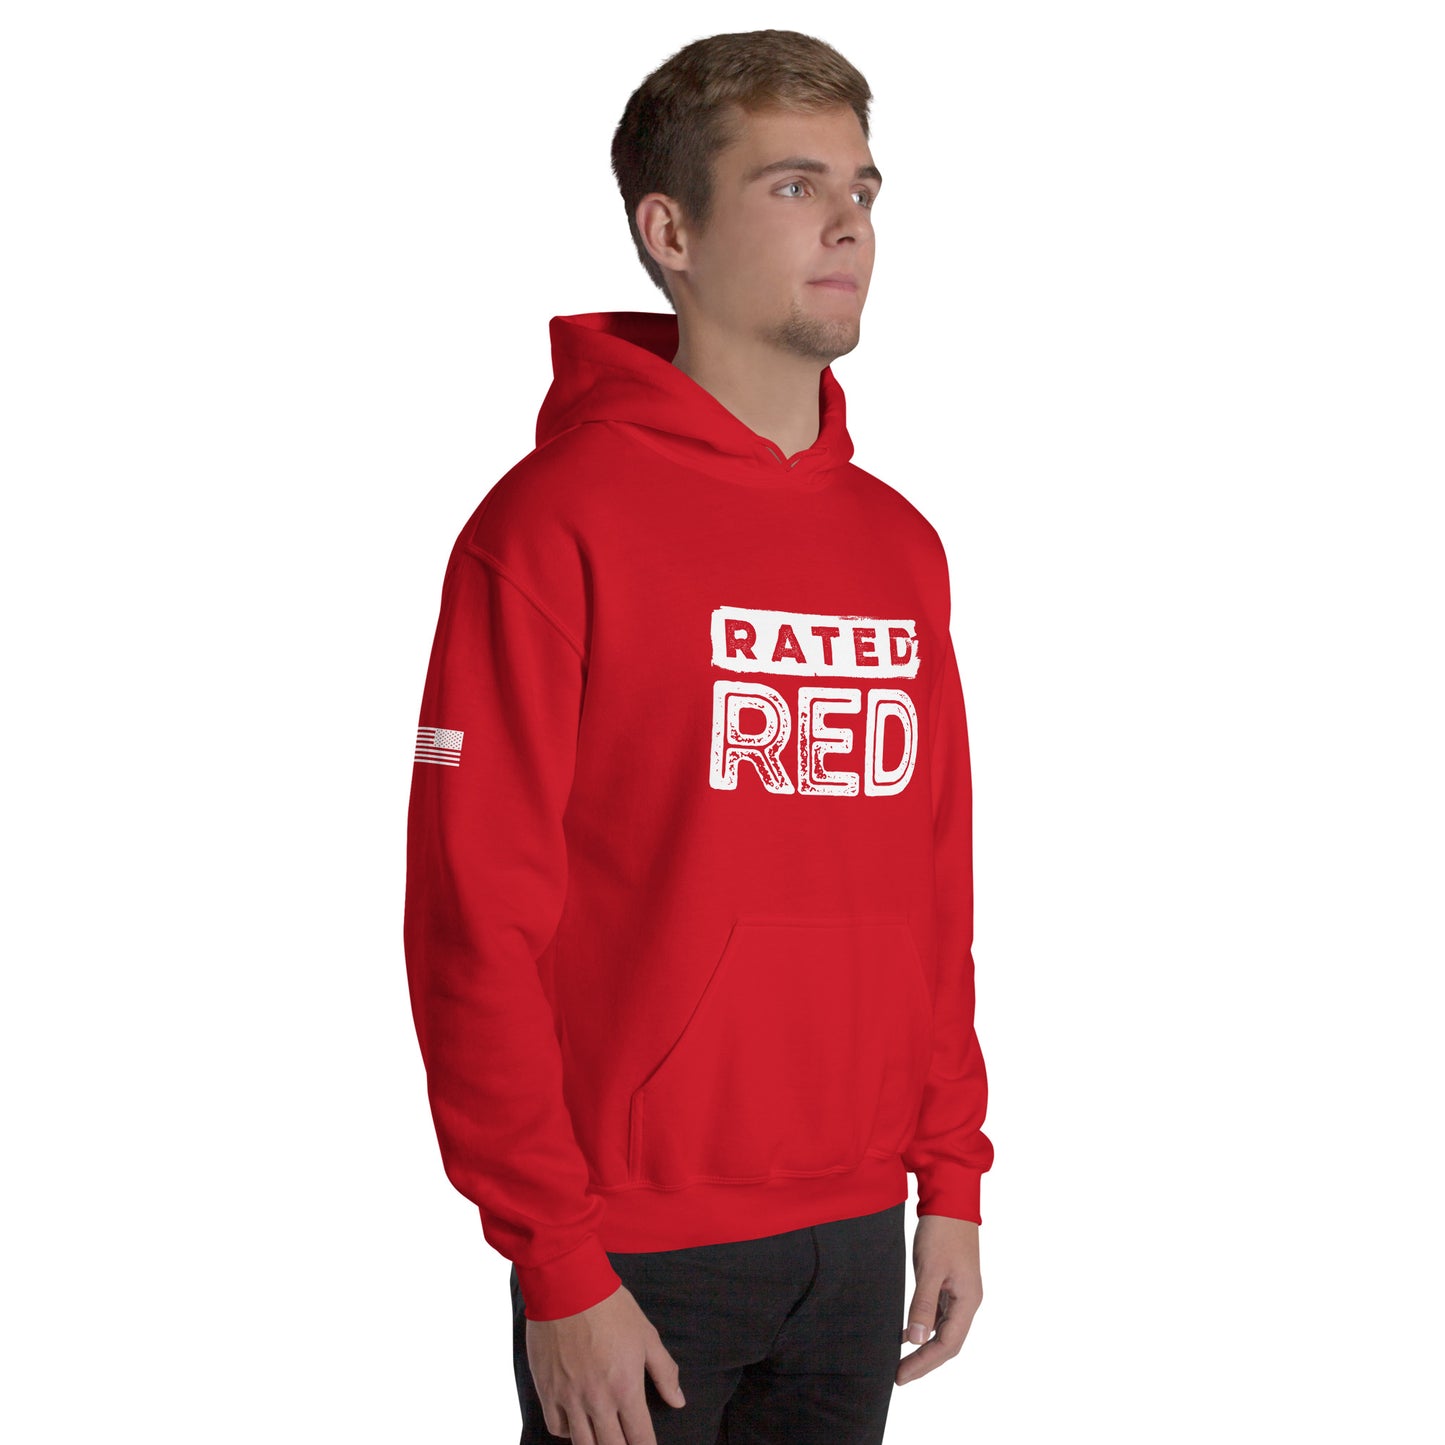 Rated Red Hoodie